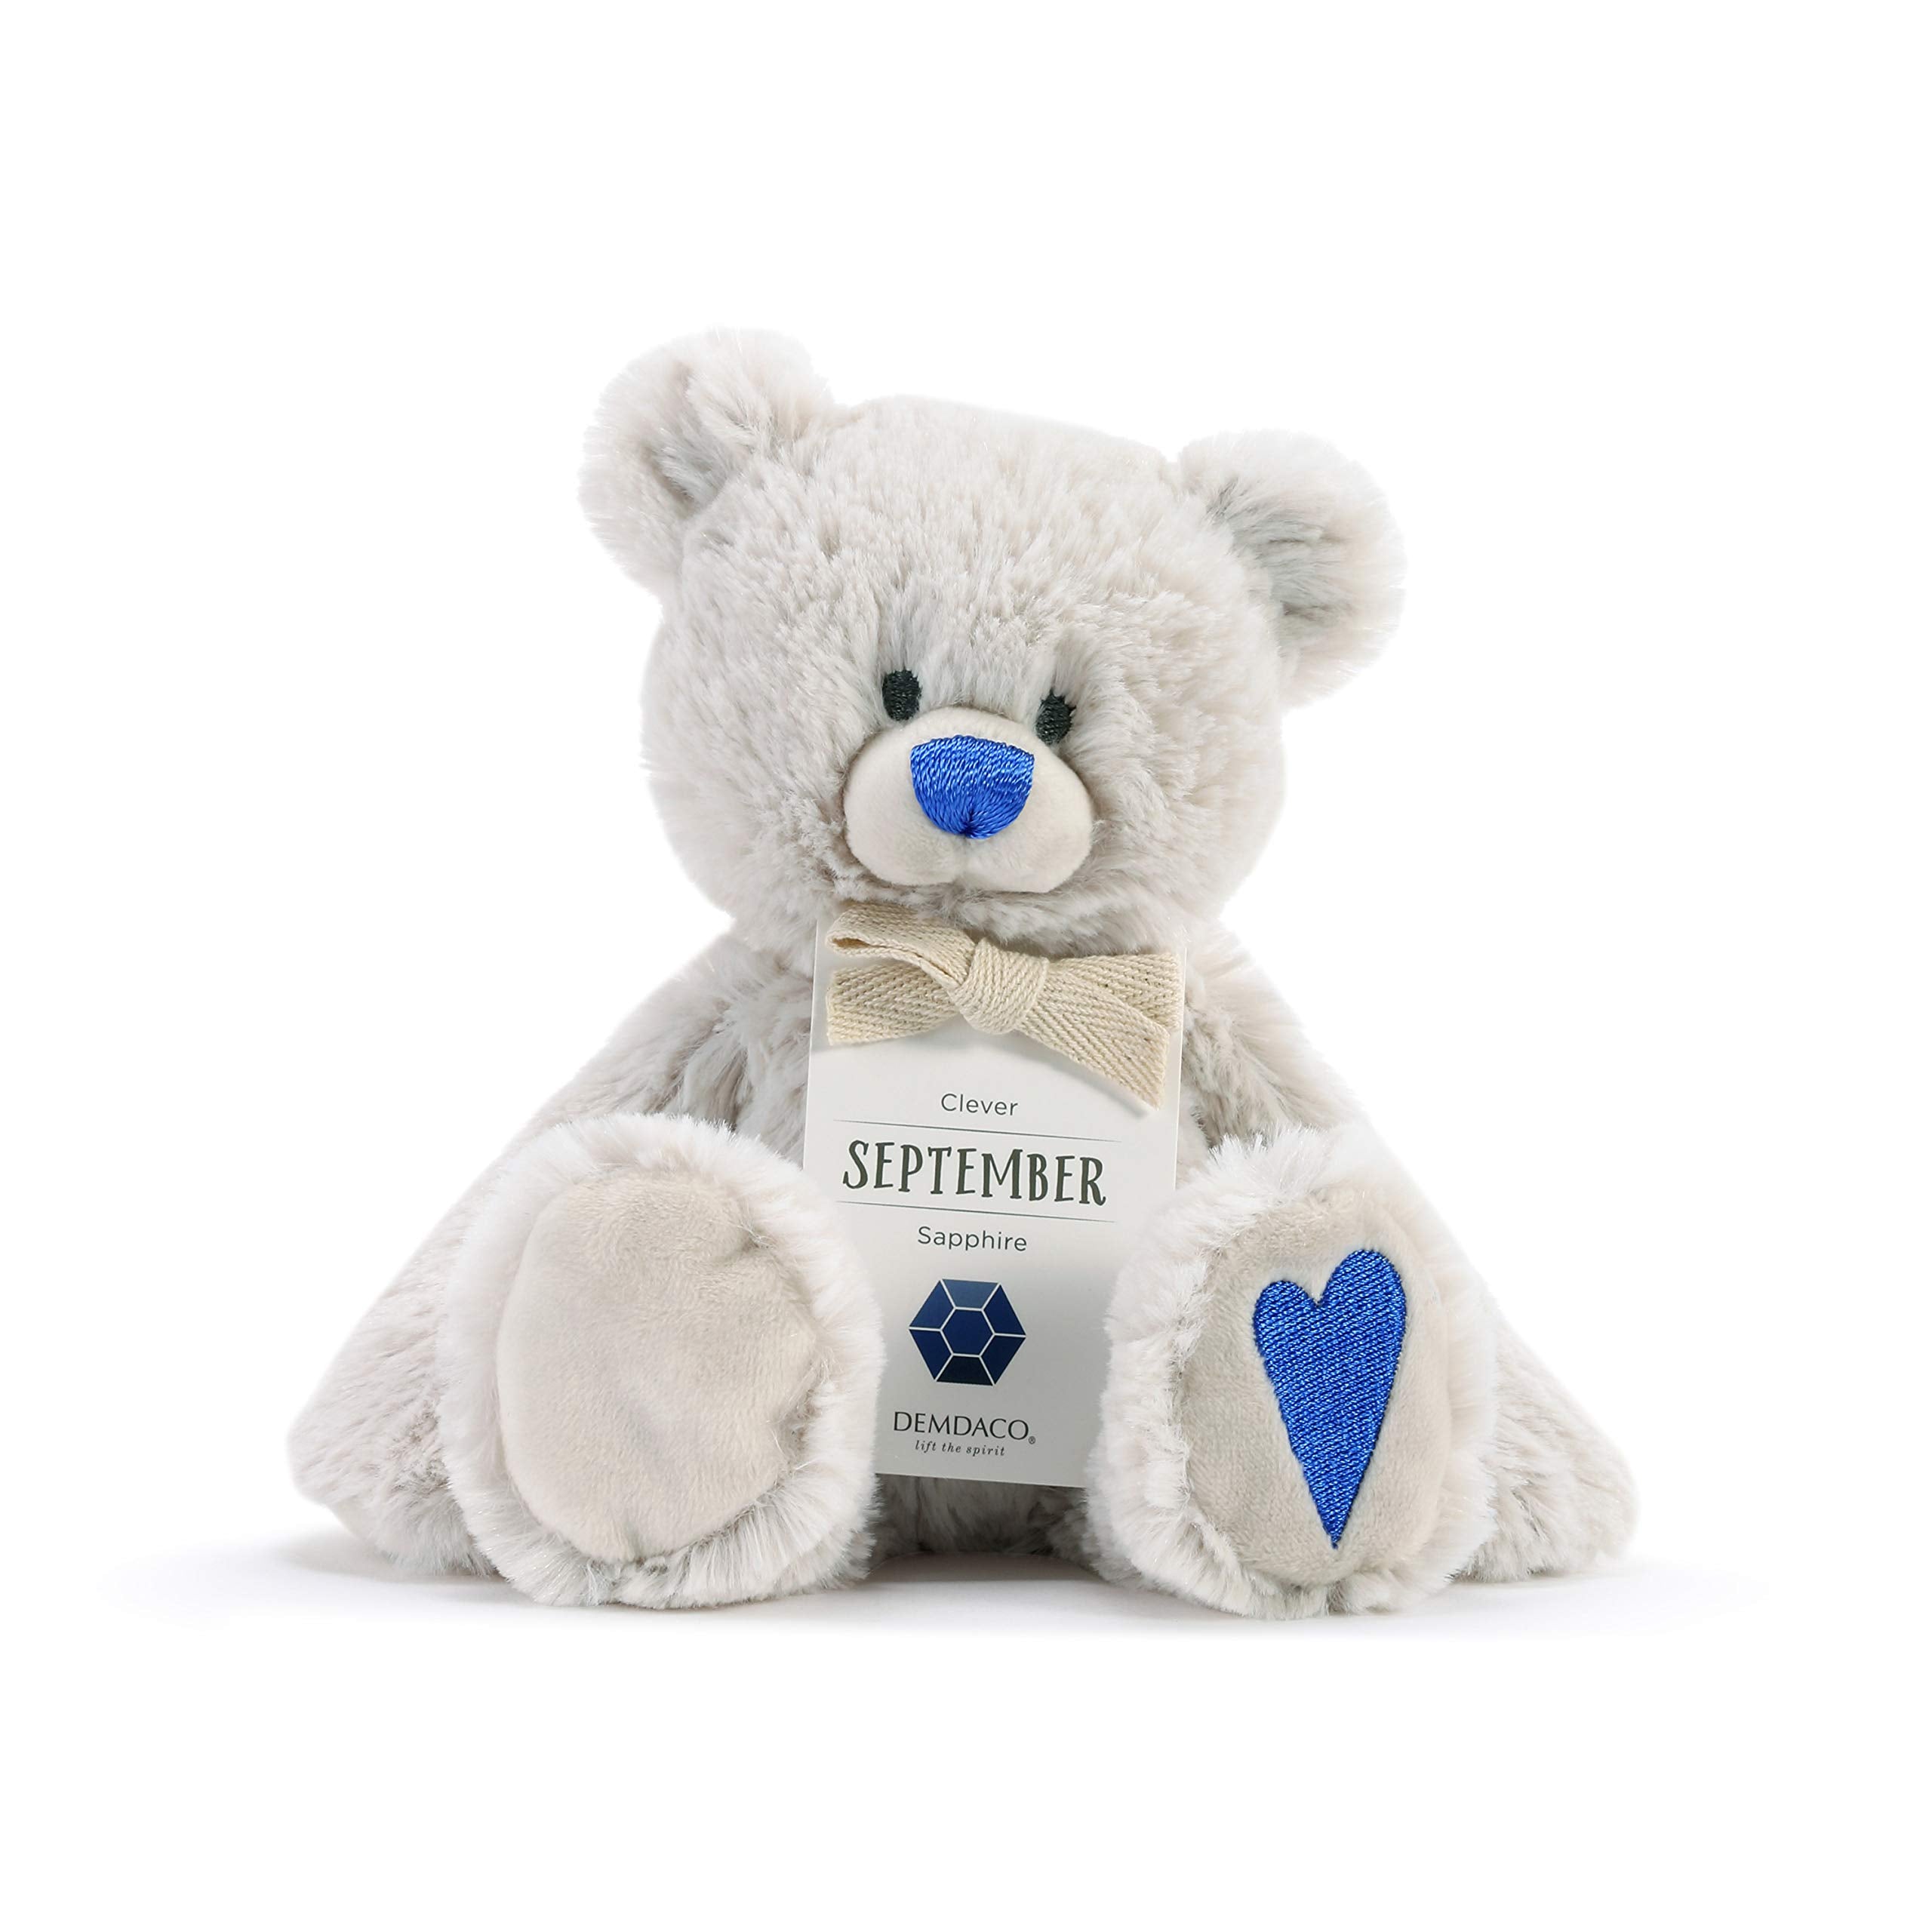 DEMDACO Clever Blue Sapphire Color September Birthstone 8.5 inch Children's Plush Stuffed Animal Toy